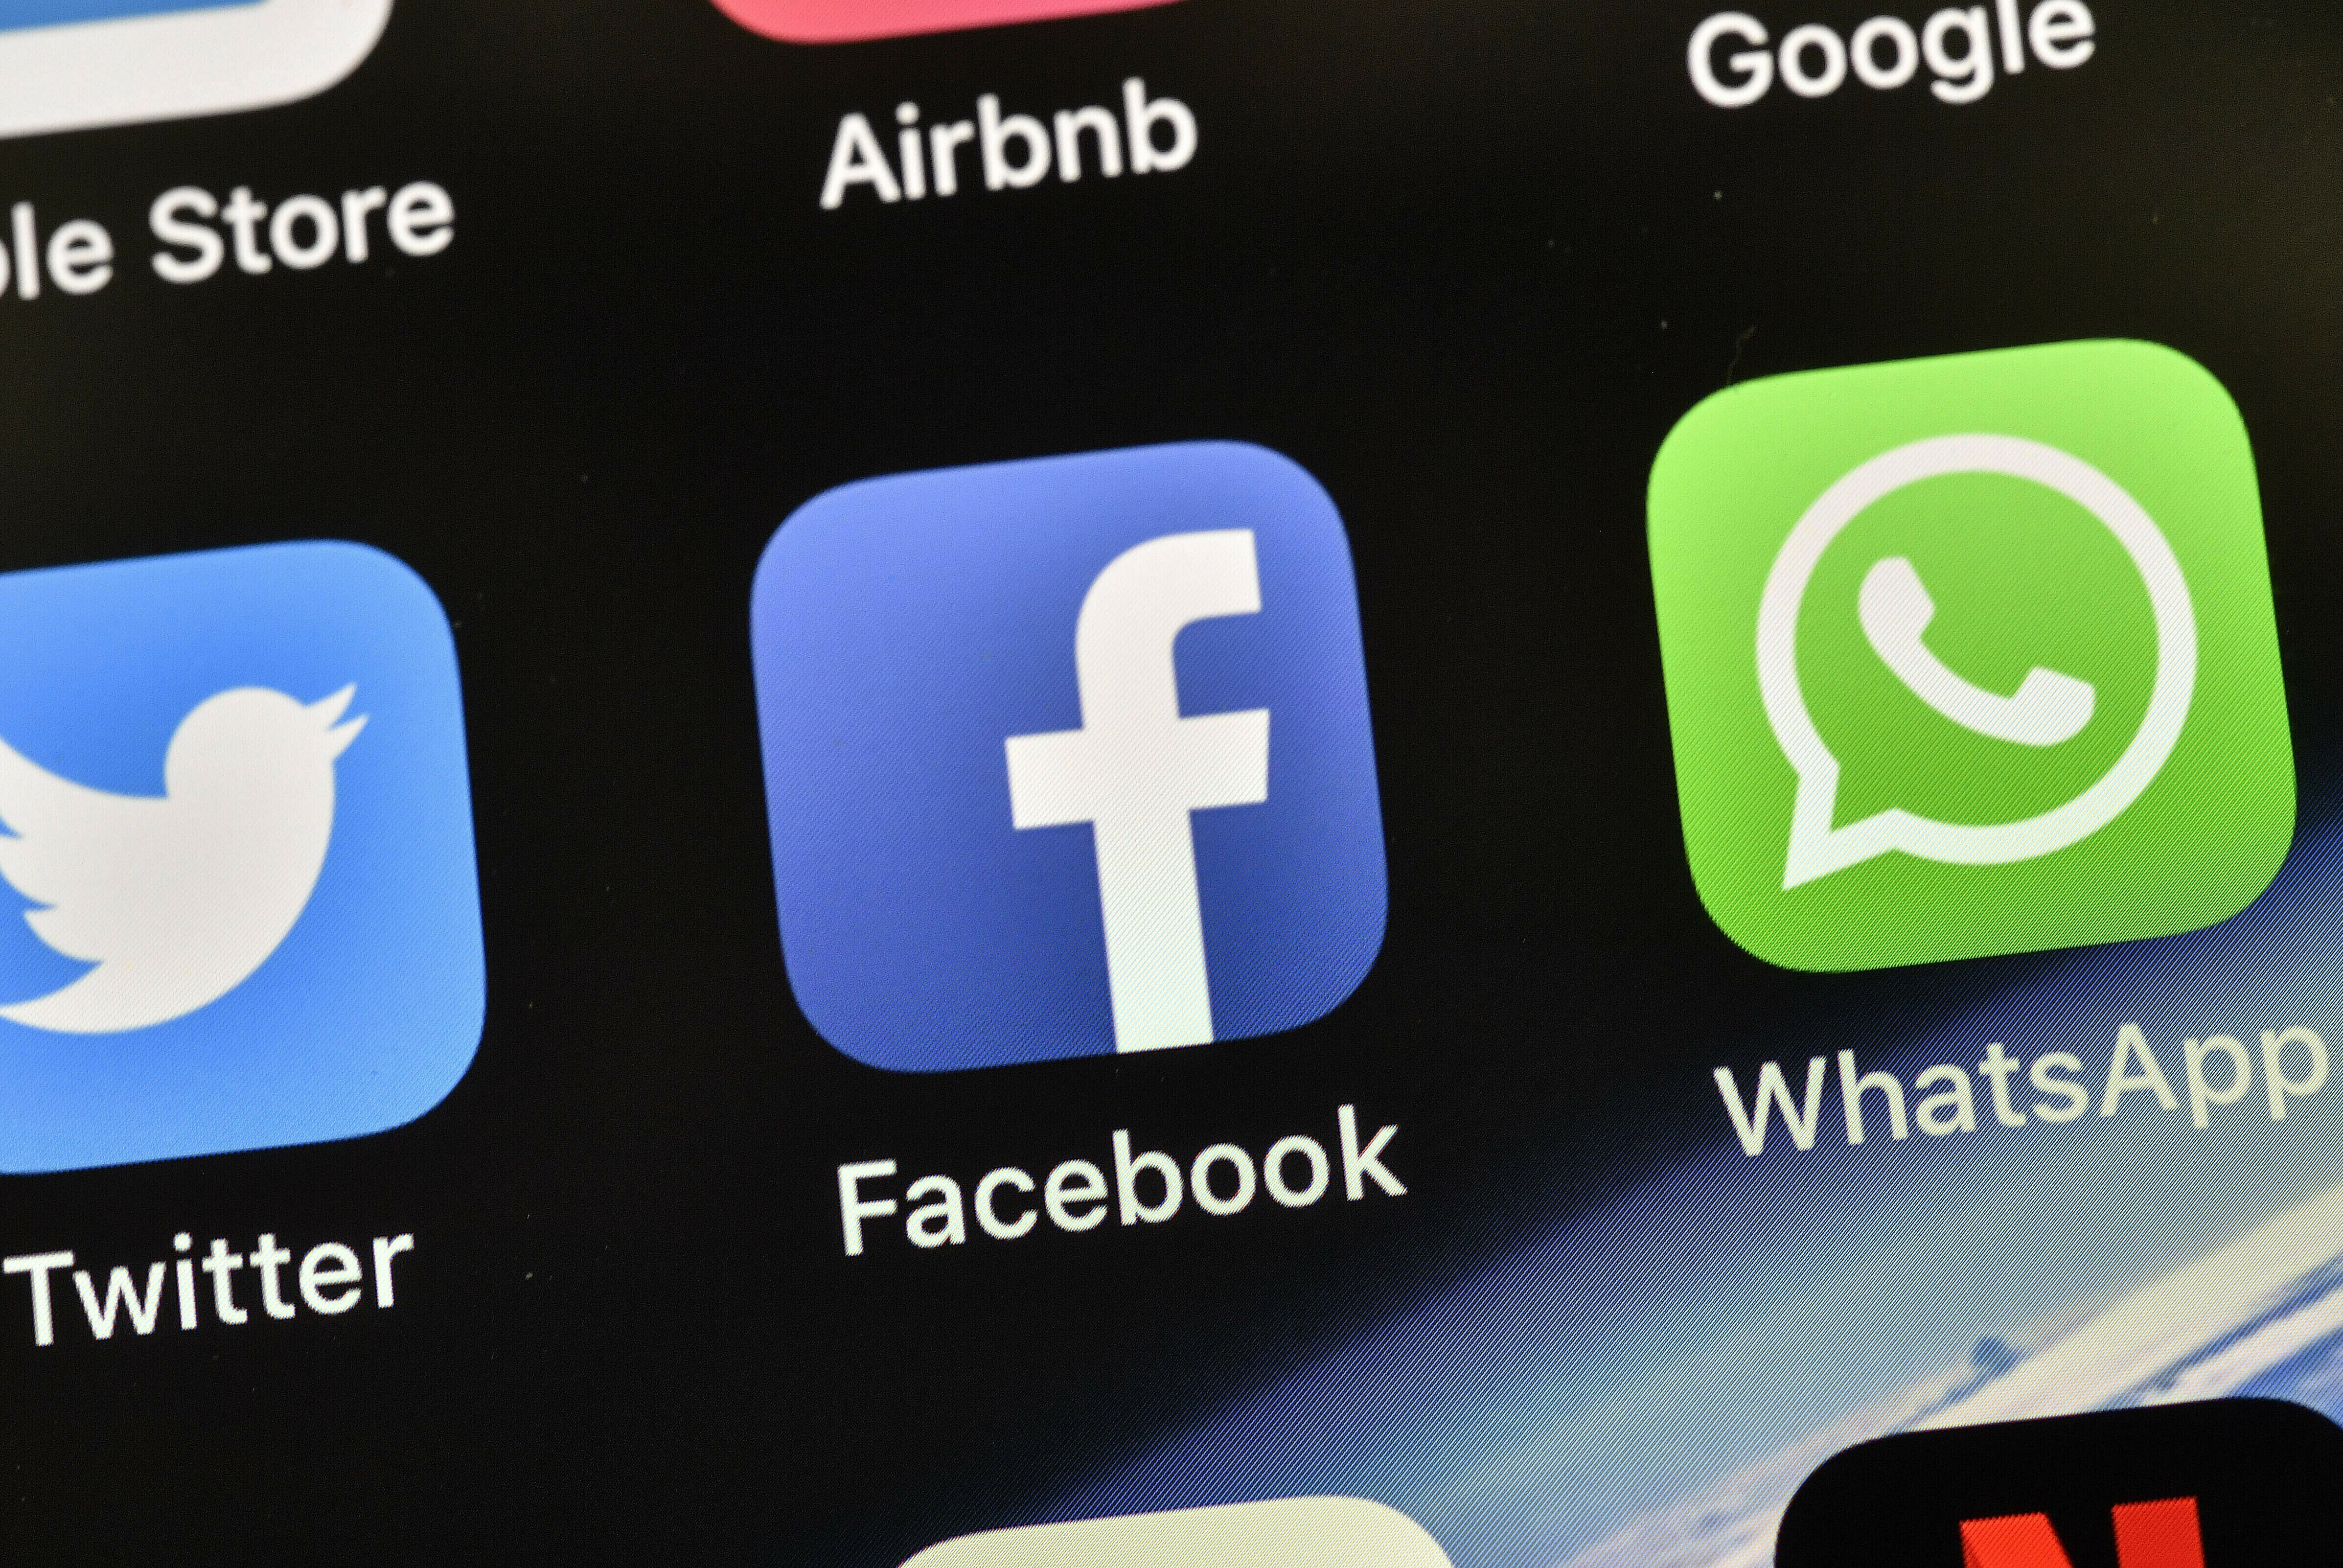 Twitter, Facebook and WhatsApp are among the social media giants who have said they are hitting pause on cooperating with Hong Kong police requests for information in the wake of the enactment of Beijing’s new national security law for the city. Photo: AP